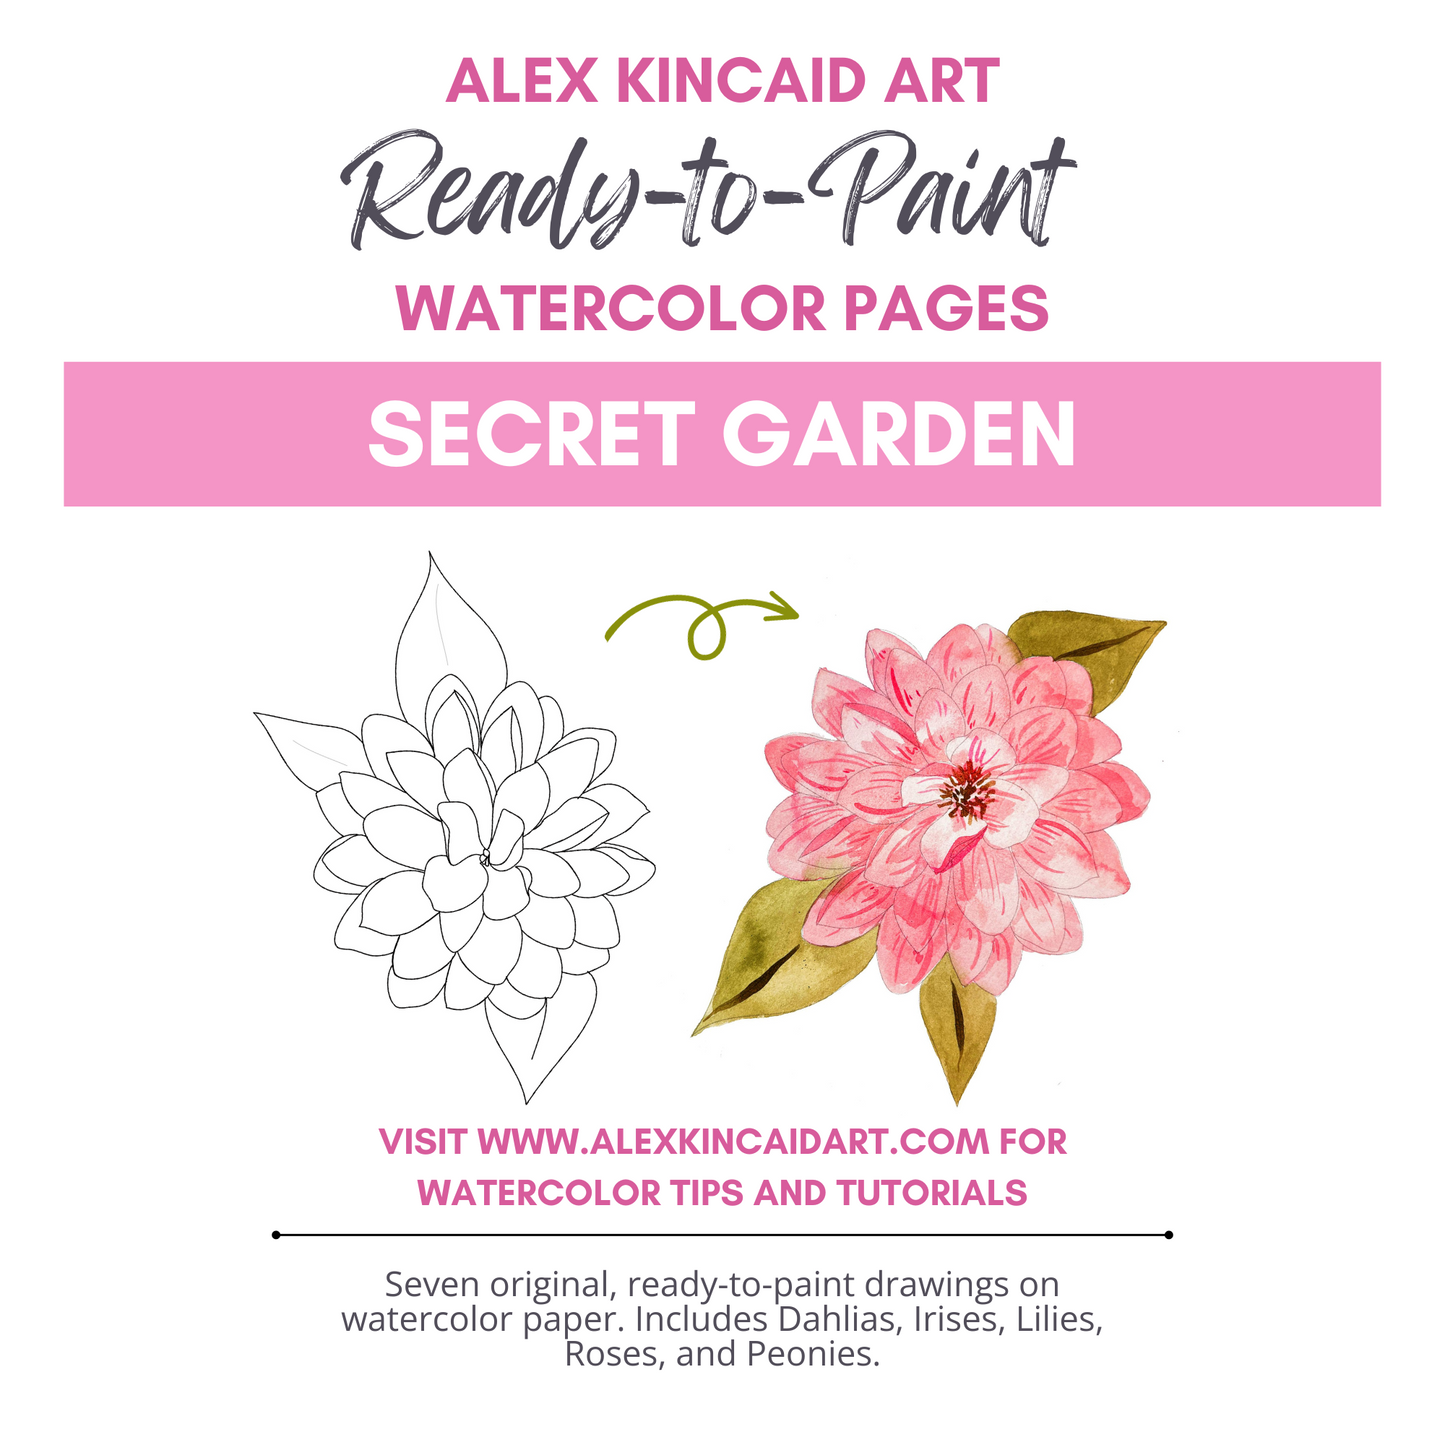 Ready-to-Paint Watercolor Pages: Secret Garden